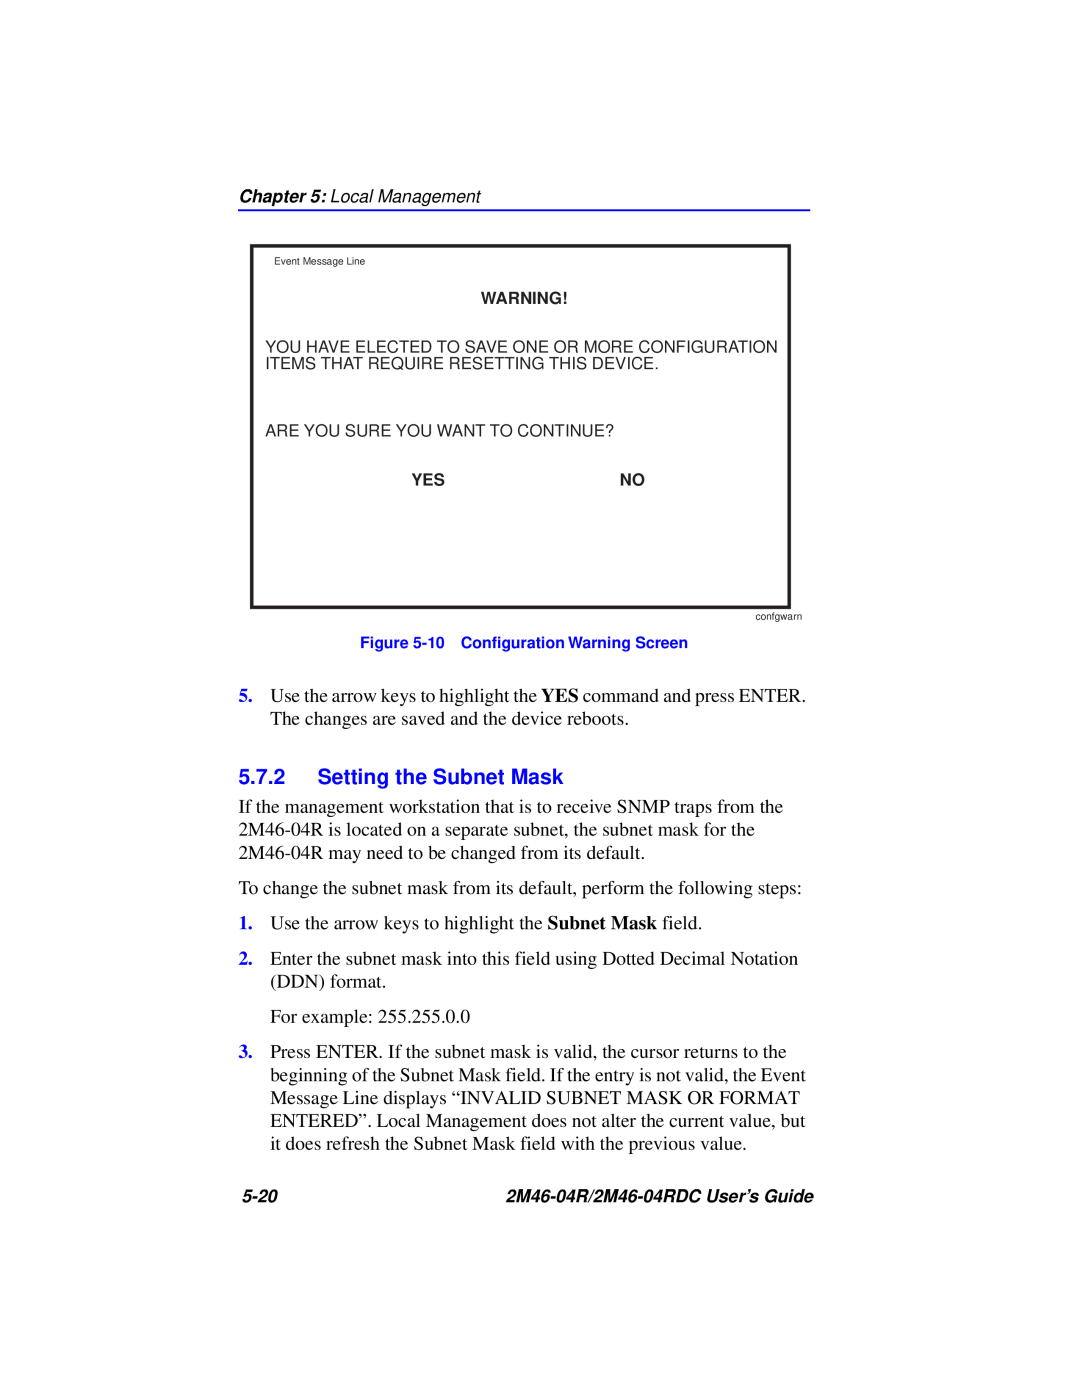 Cabletron Systems pmn manual Setting the Subnet Mask 